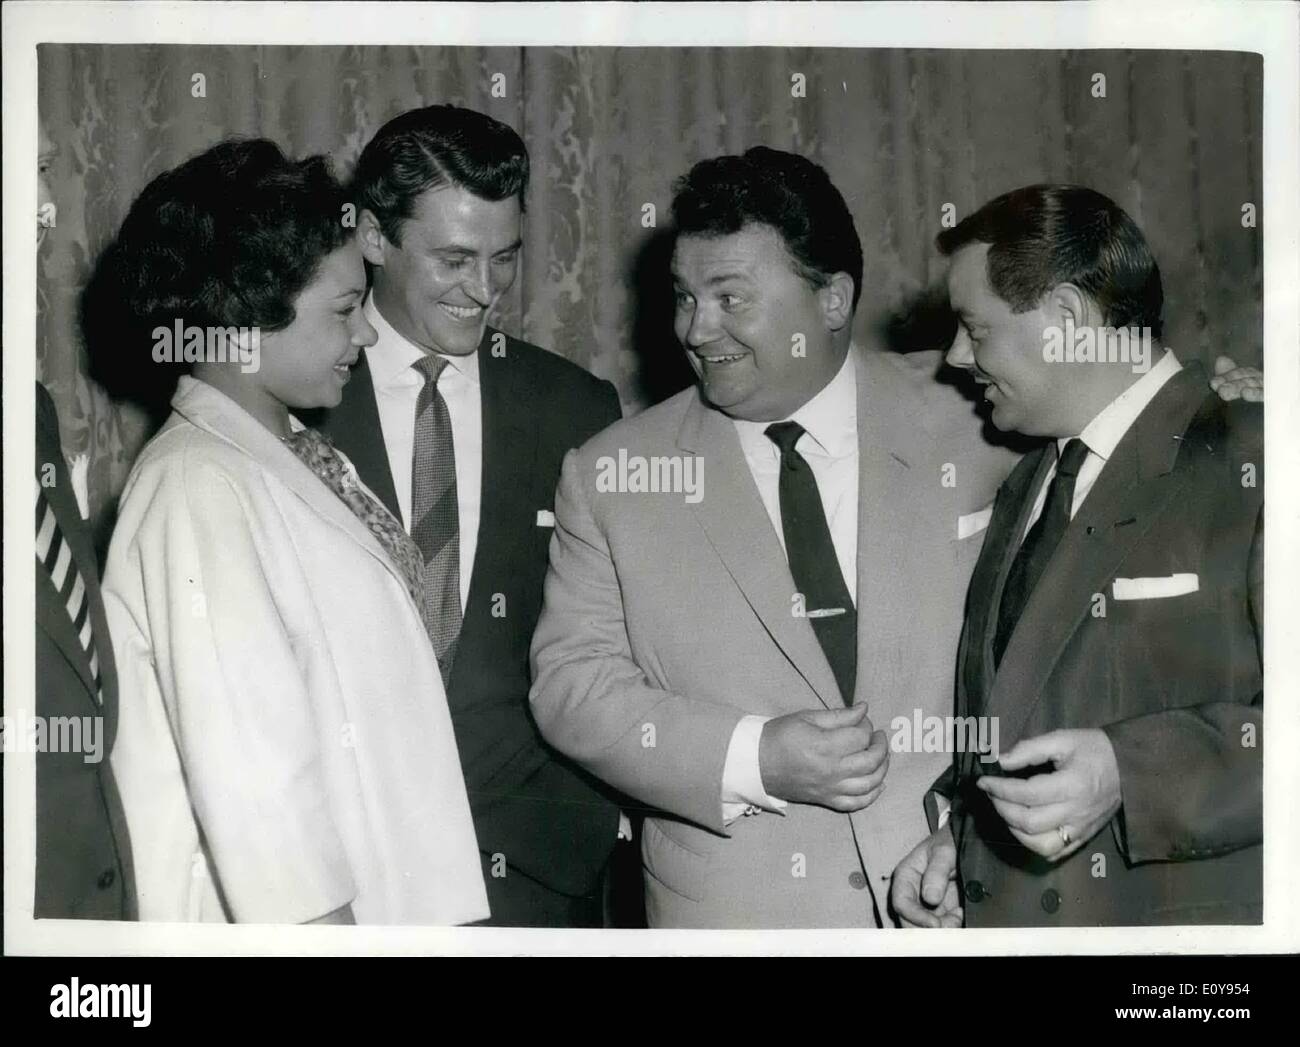 May 13, 1969 - 13-5-59 Record personalities at Variety Club Luncheon. Top recording singers, conductors, instrumentalists and disc jockeys were guests of honour at the Variety Club of Great Britain's third annual Golden Disc luncheon at the Dorchester today. Keystone Photo Shows: Pictured at the luncheon today are (L to R) Shirley Bassey, Russ Conway, Harry Secombe and Eddie Calvert. Stock Photo